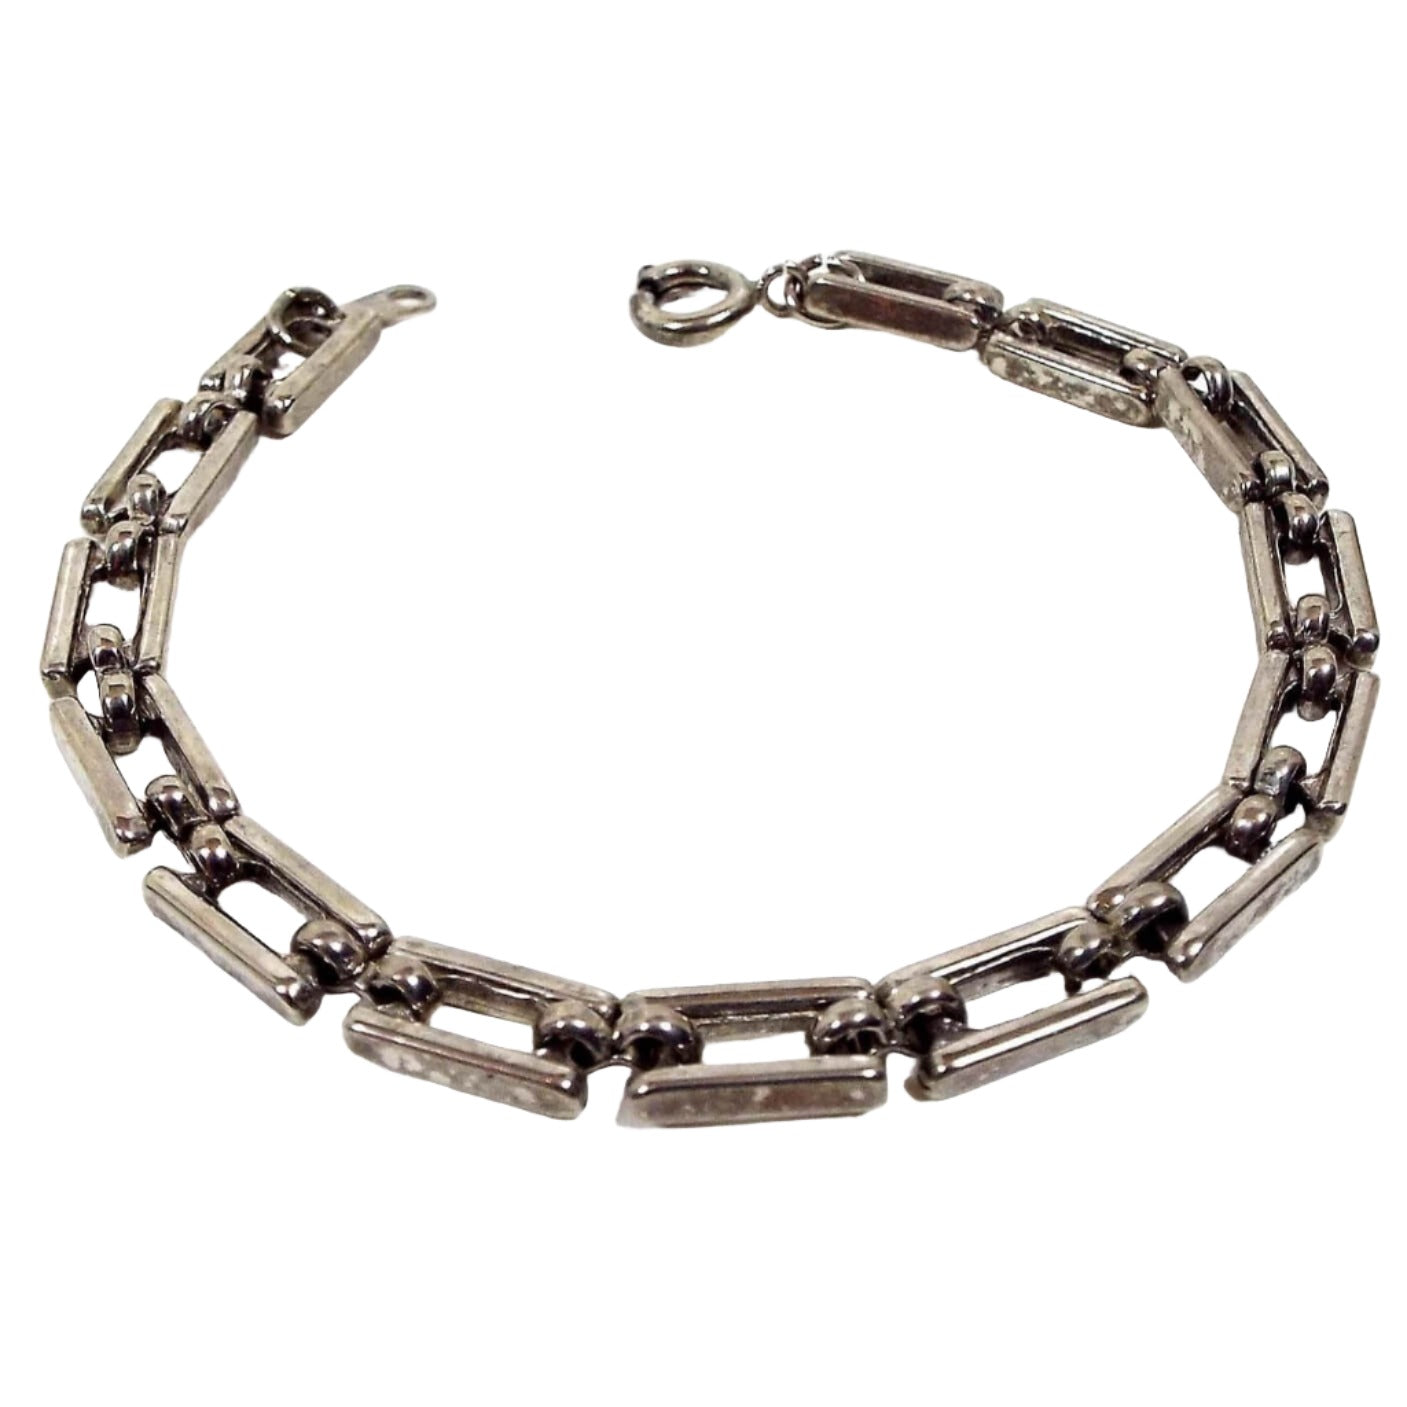 Angled view of the retro vintage link bracelet. It is antiqued silver tone in color and has open rectangle links. There is a spring ring clasp at the end.